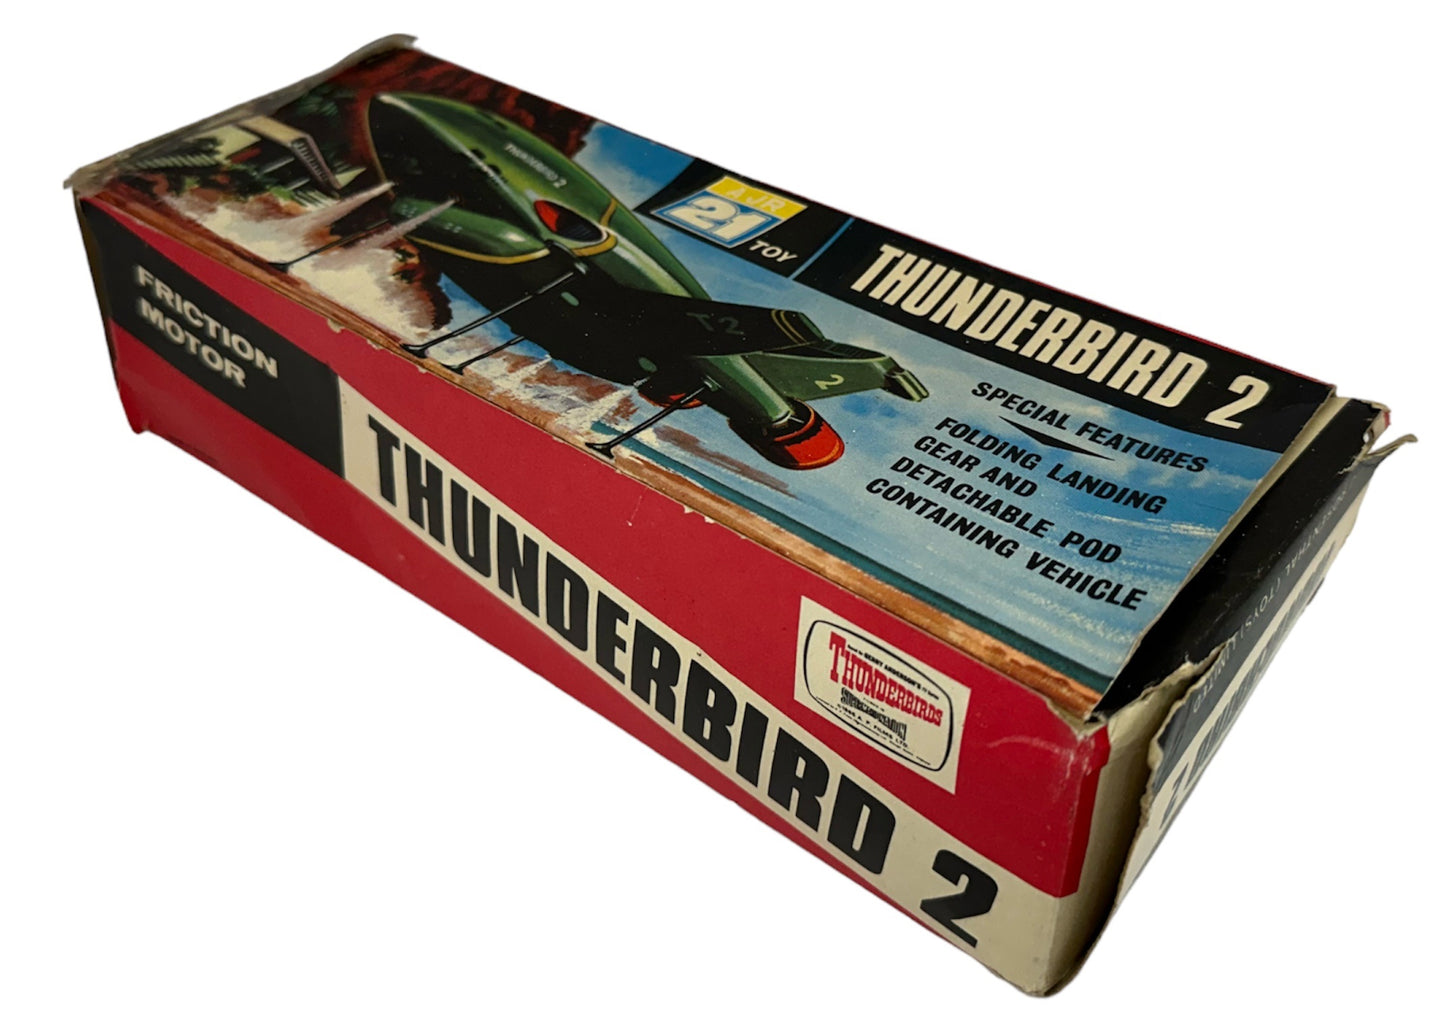 Vintage JR21 1965 Gerry Andersons Thunderbirds Thunderbird 2 Friction Motor Scale Model With The Mole - Fantastic Condition In The Original Box